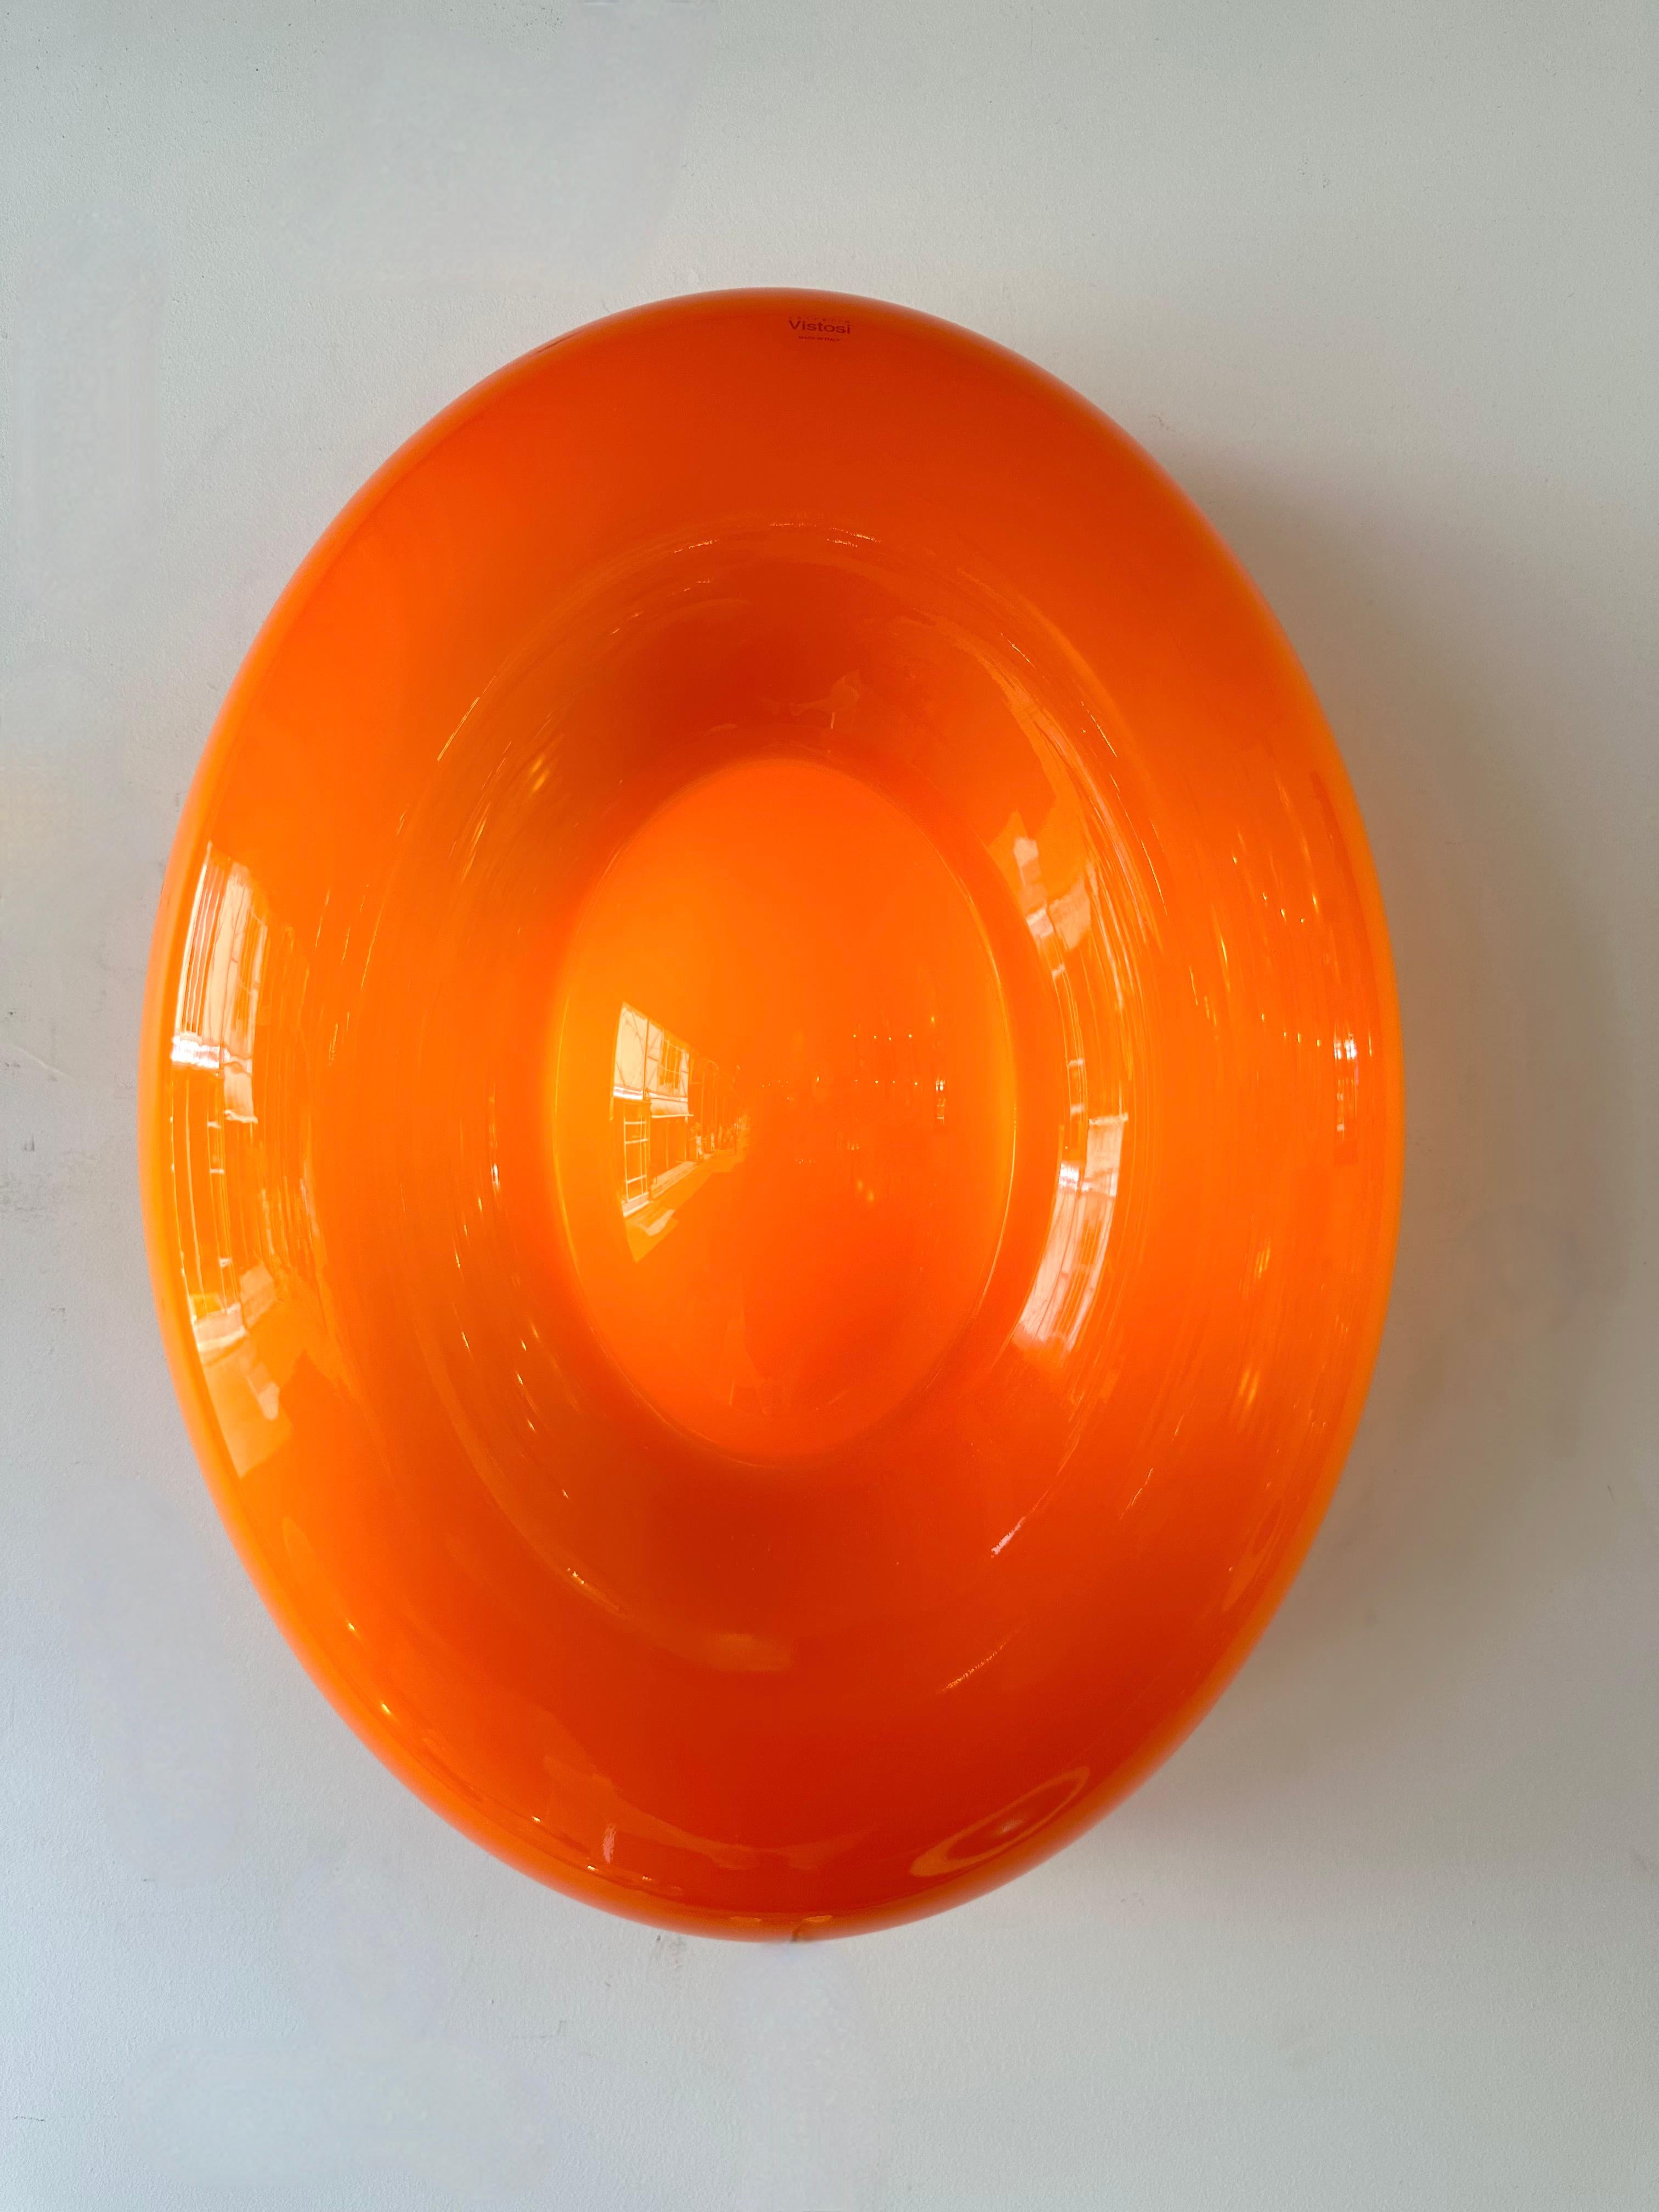 Contemporary Mid-Century Modern Space Age style Orange Murano glass Candy wall lamps lights lightning sconces. New old stock from the italian design Murano manufacture Vistosi circa 2010. Original editor stamps stickers tags on the glass. Famous